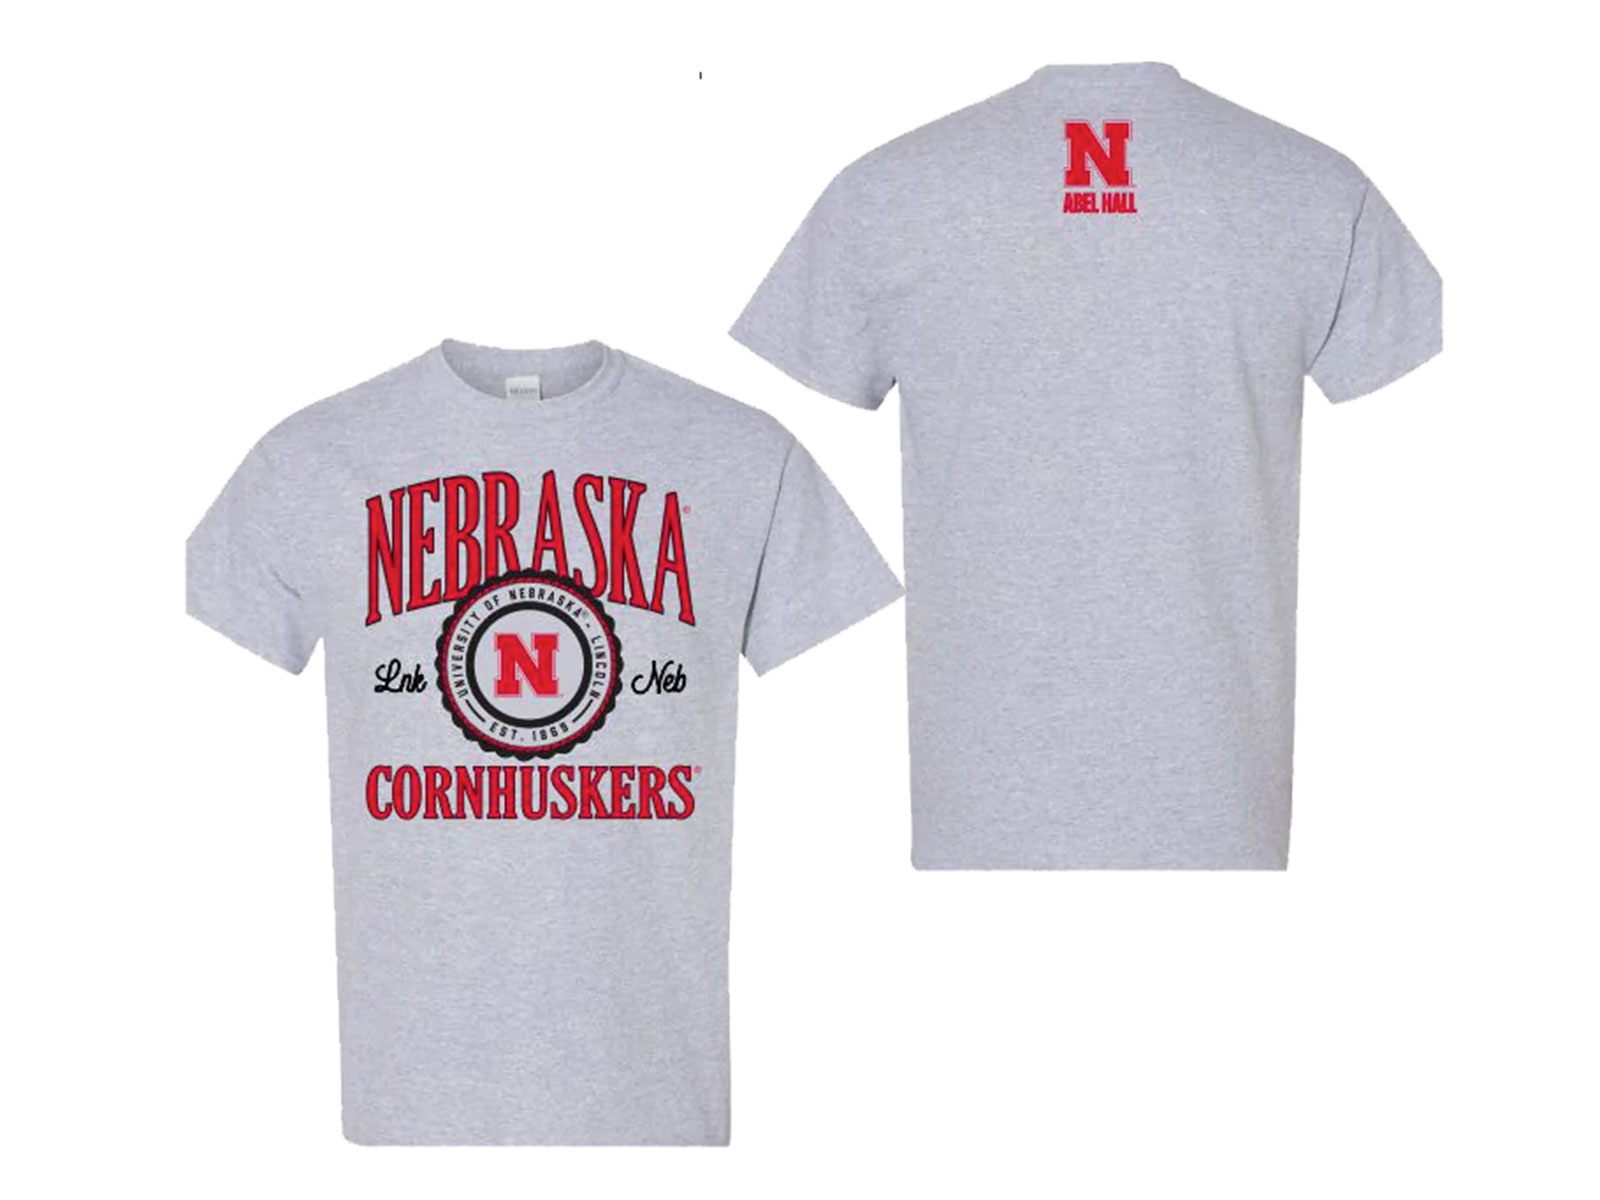 Huskers should place orders for shirts and sweatshirts with their residence hall name by July 11.